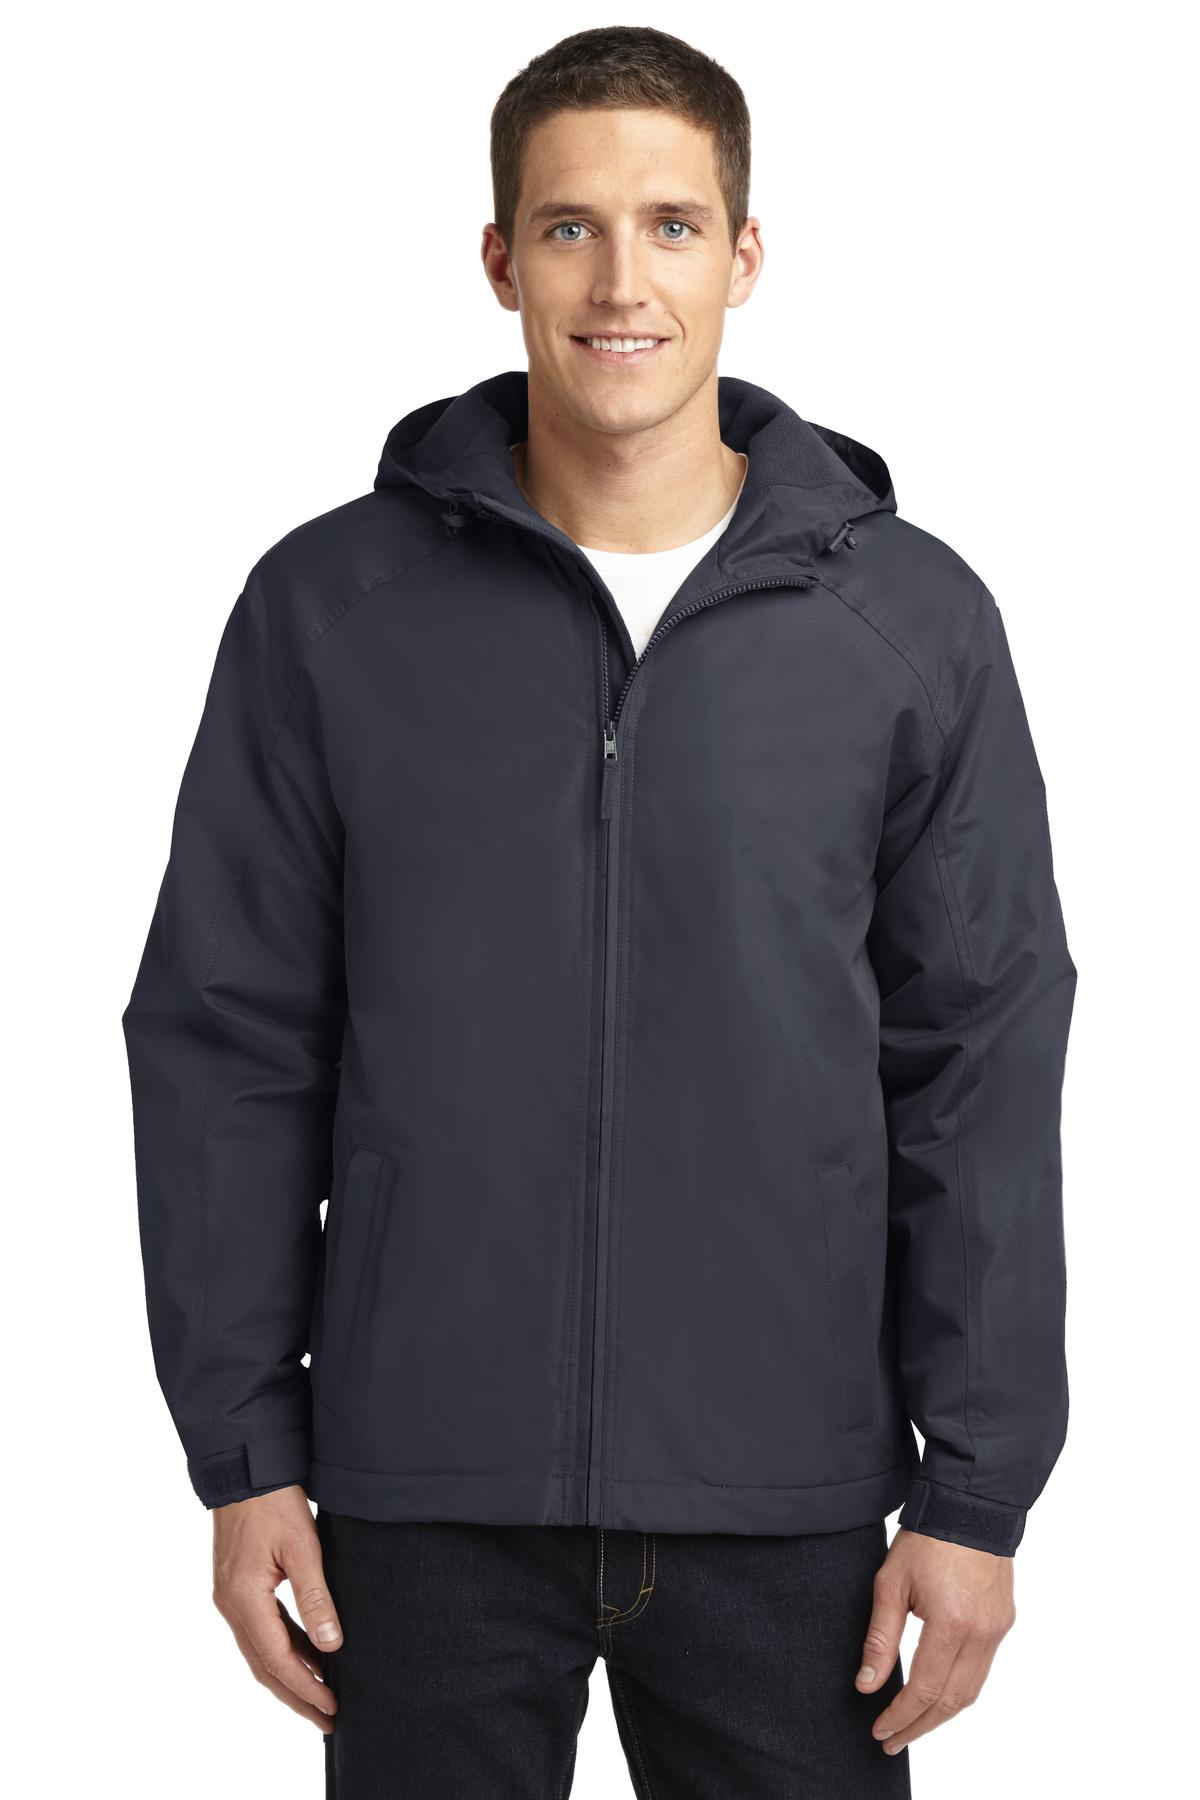 Port Authority Hooded Charger Jacket - J327